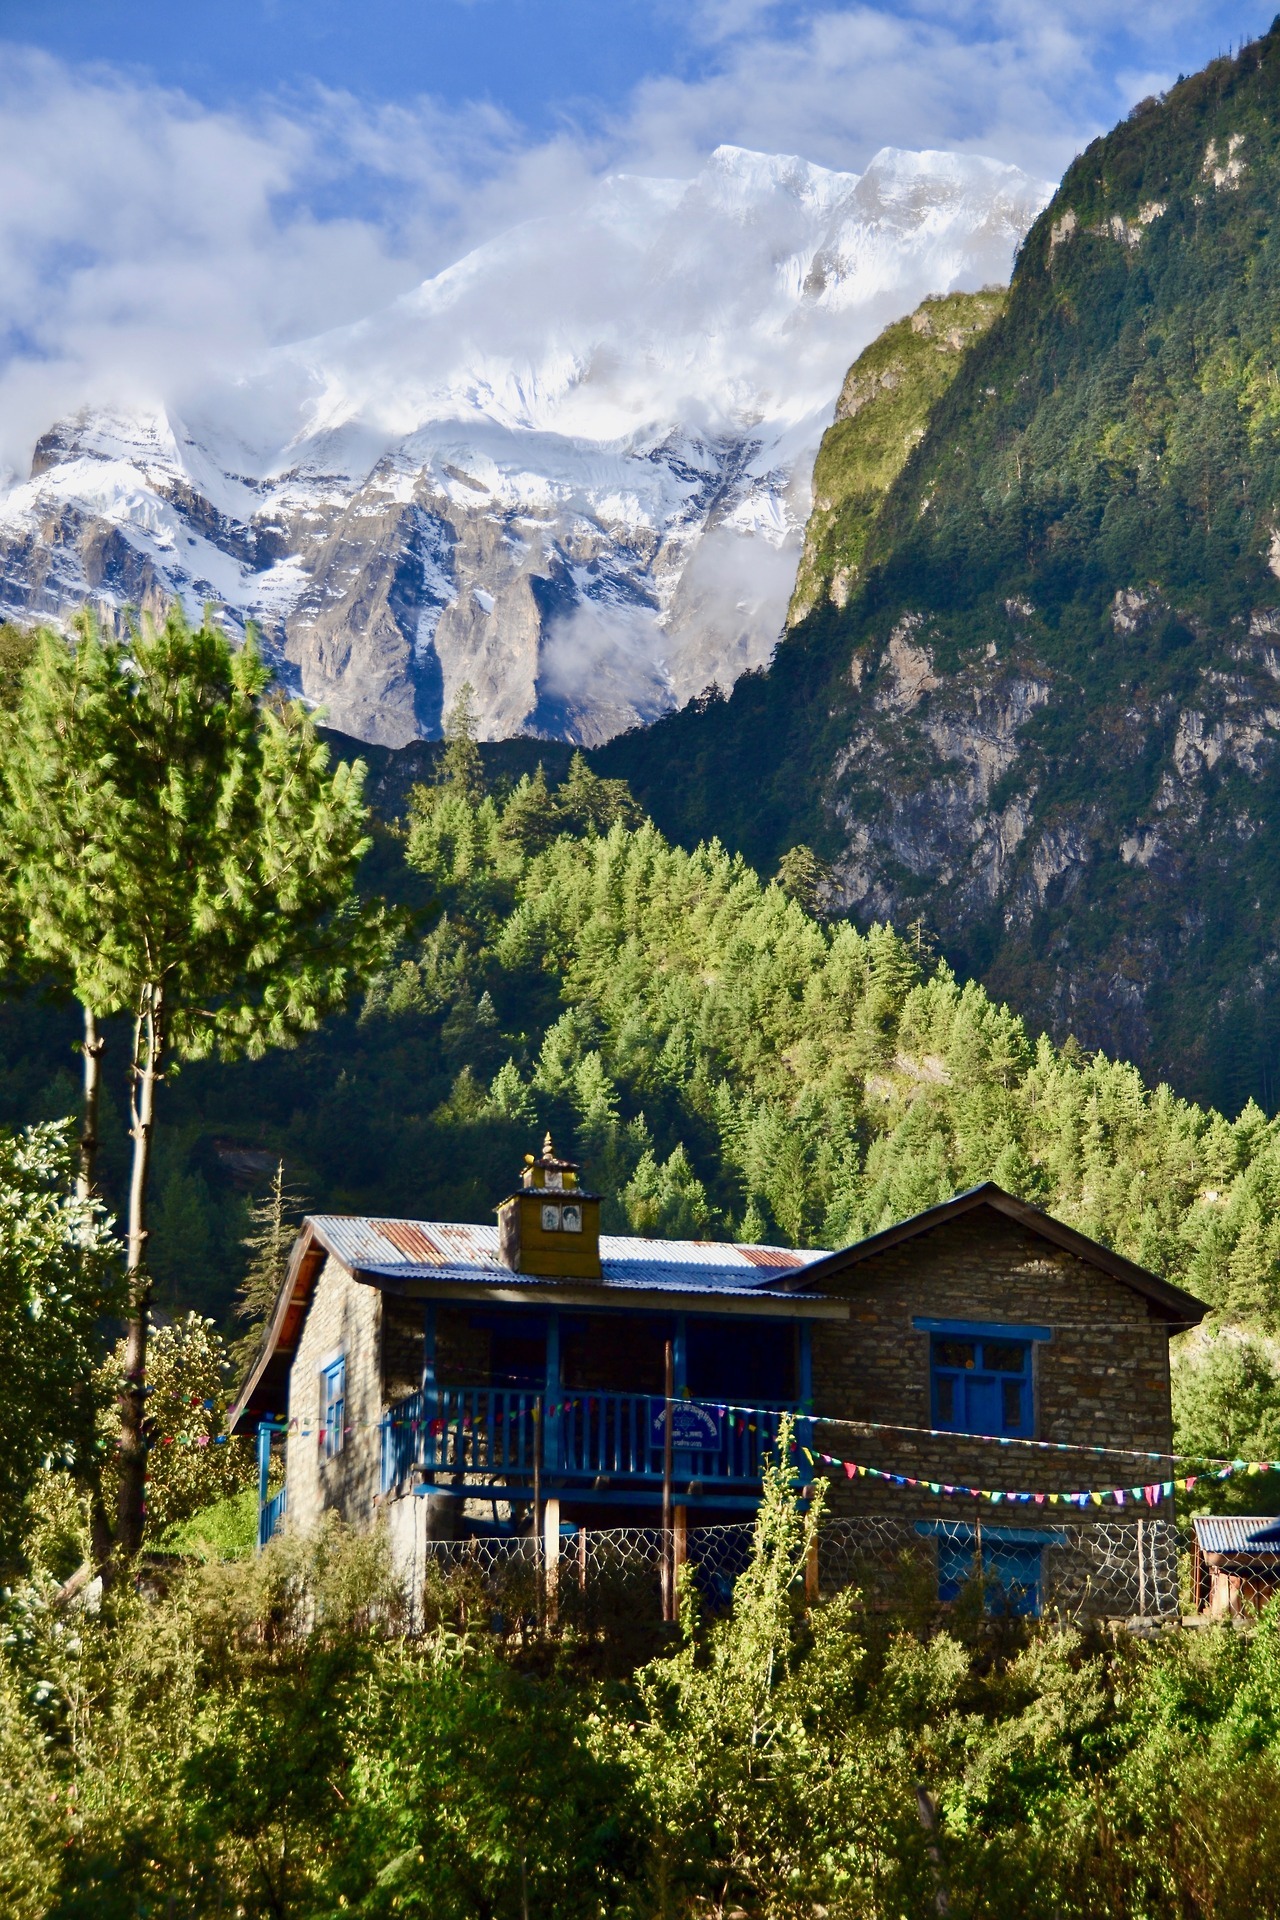 Located just outside of the small mountain town of Chame in Nepal
This cabin has access to hot springs and the Trishuli river along with stunning views of Annapurna range behind it. Simple living is found in this predominately stone and lumber...